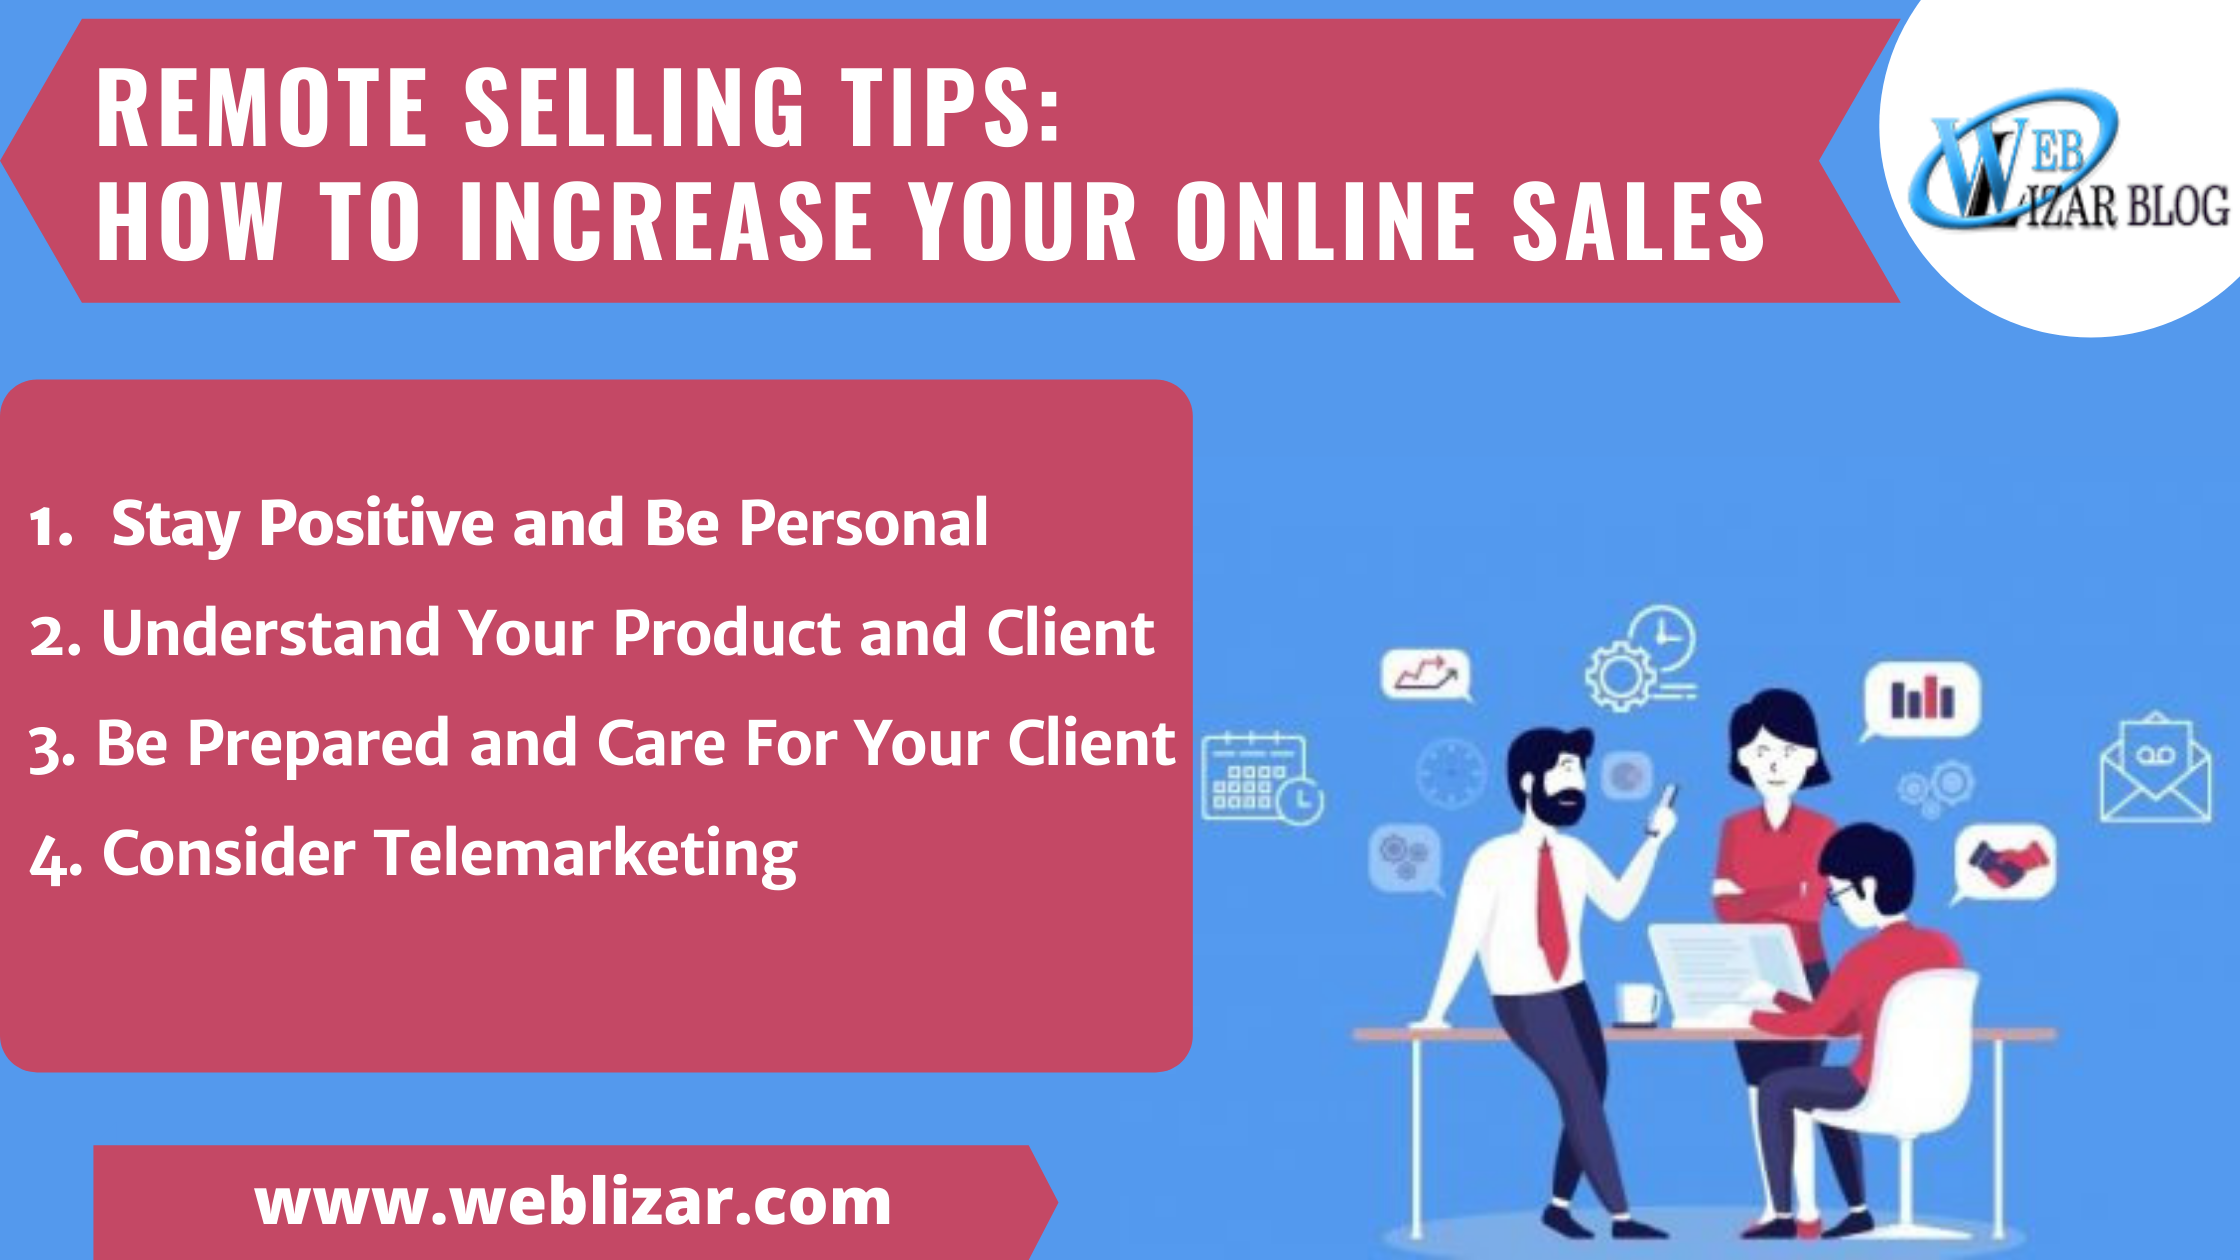 Remote Selling Tips: How To Increase Your Online Sales-Weblizar